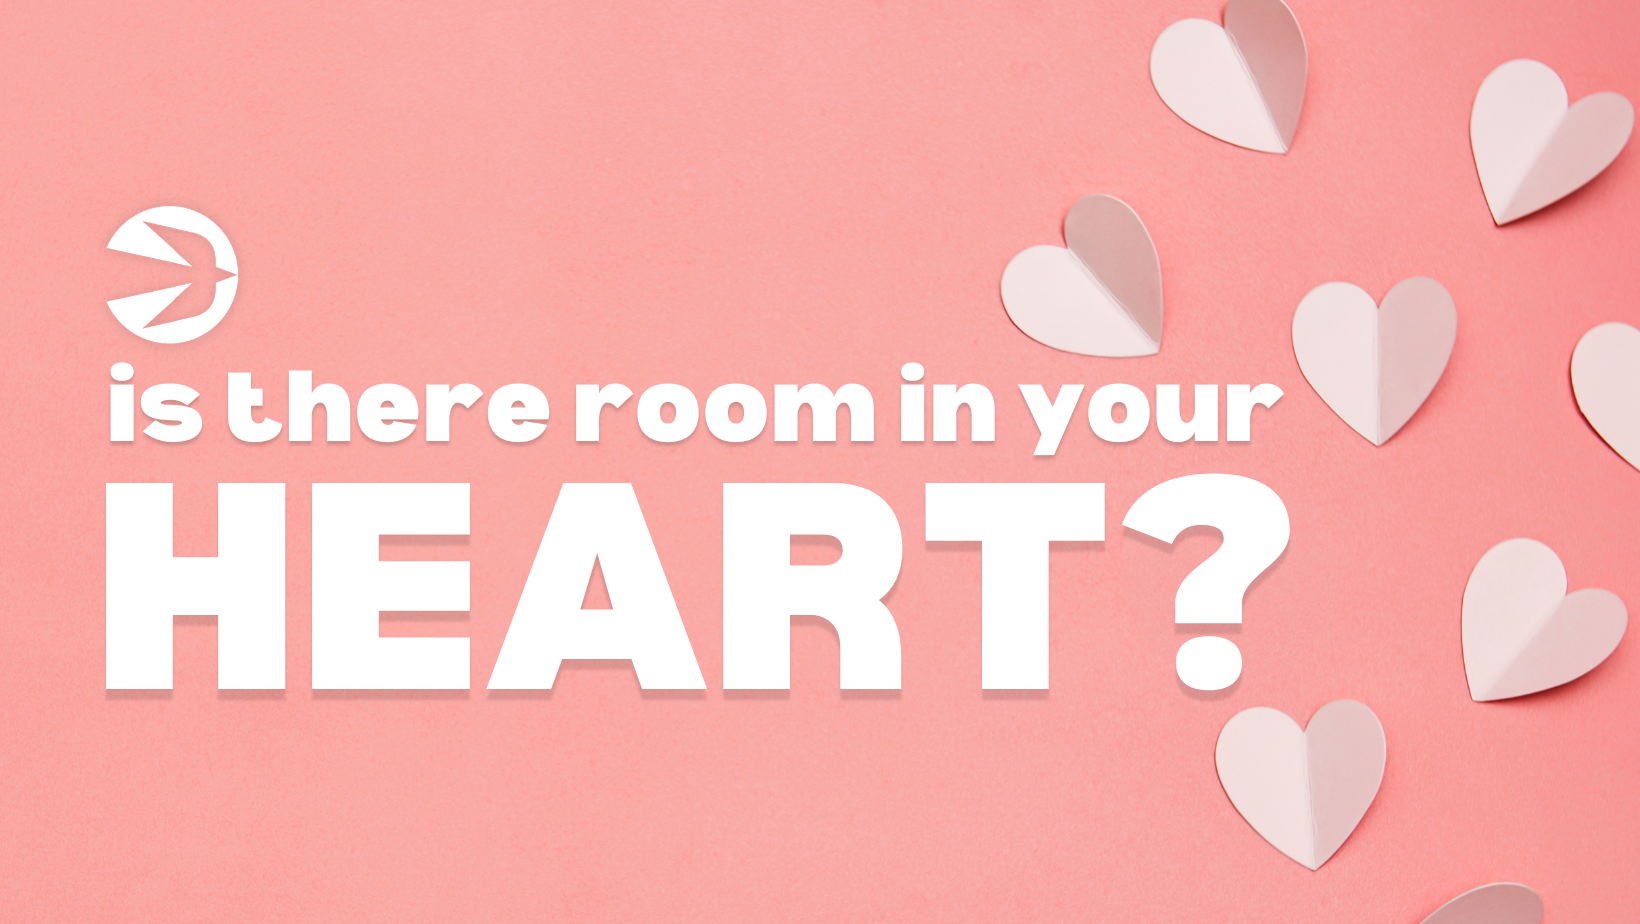 A pink background with paper heart shapes scattered on the right side. The text reads "Is there room in your heart?" in large, bold white letters, with a small bird graphic on the left of the text.